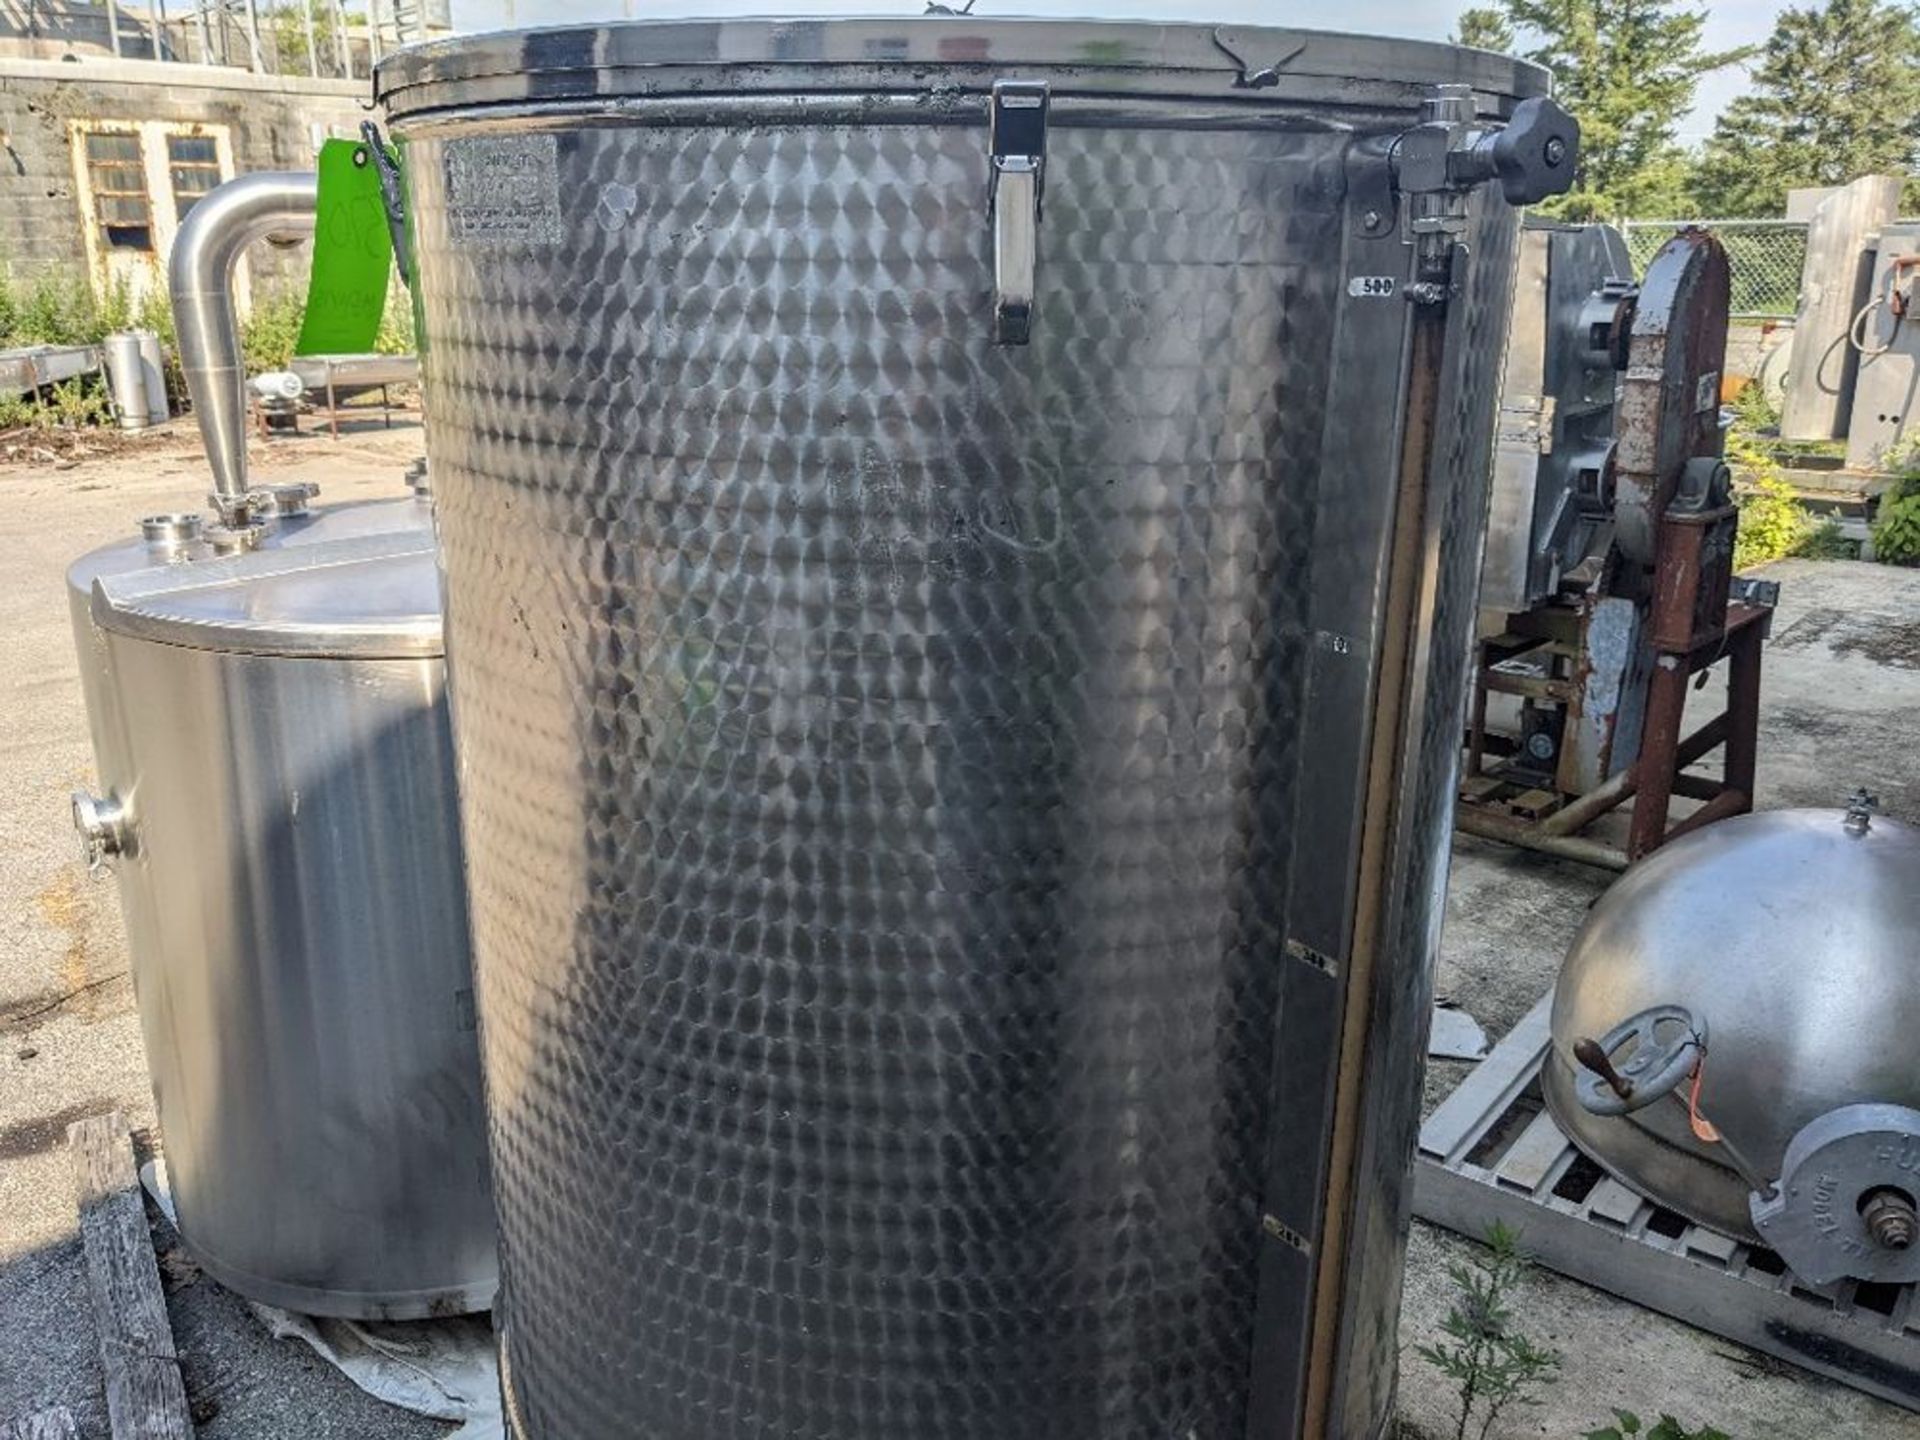 Qty (1) Brevetti 150 Gallon Open Top Tank - Portable stainless steel open top tank w/ lid. - 32' - Image 2 of 4